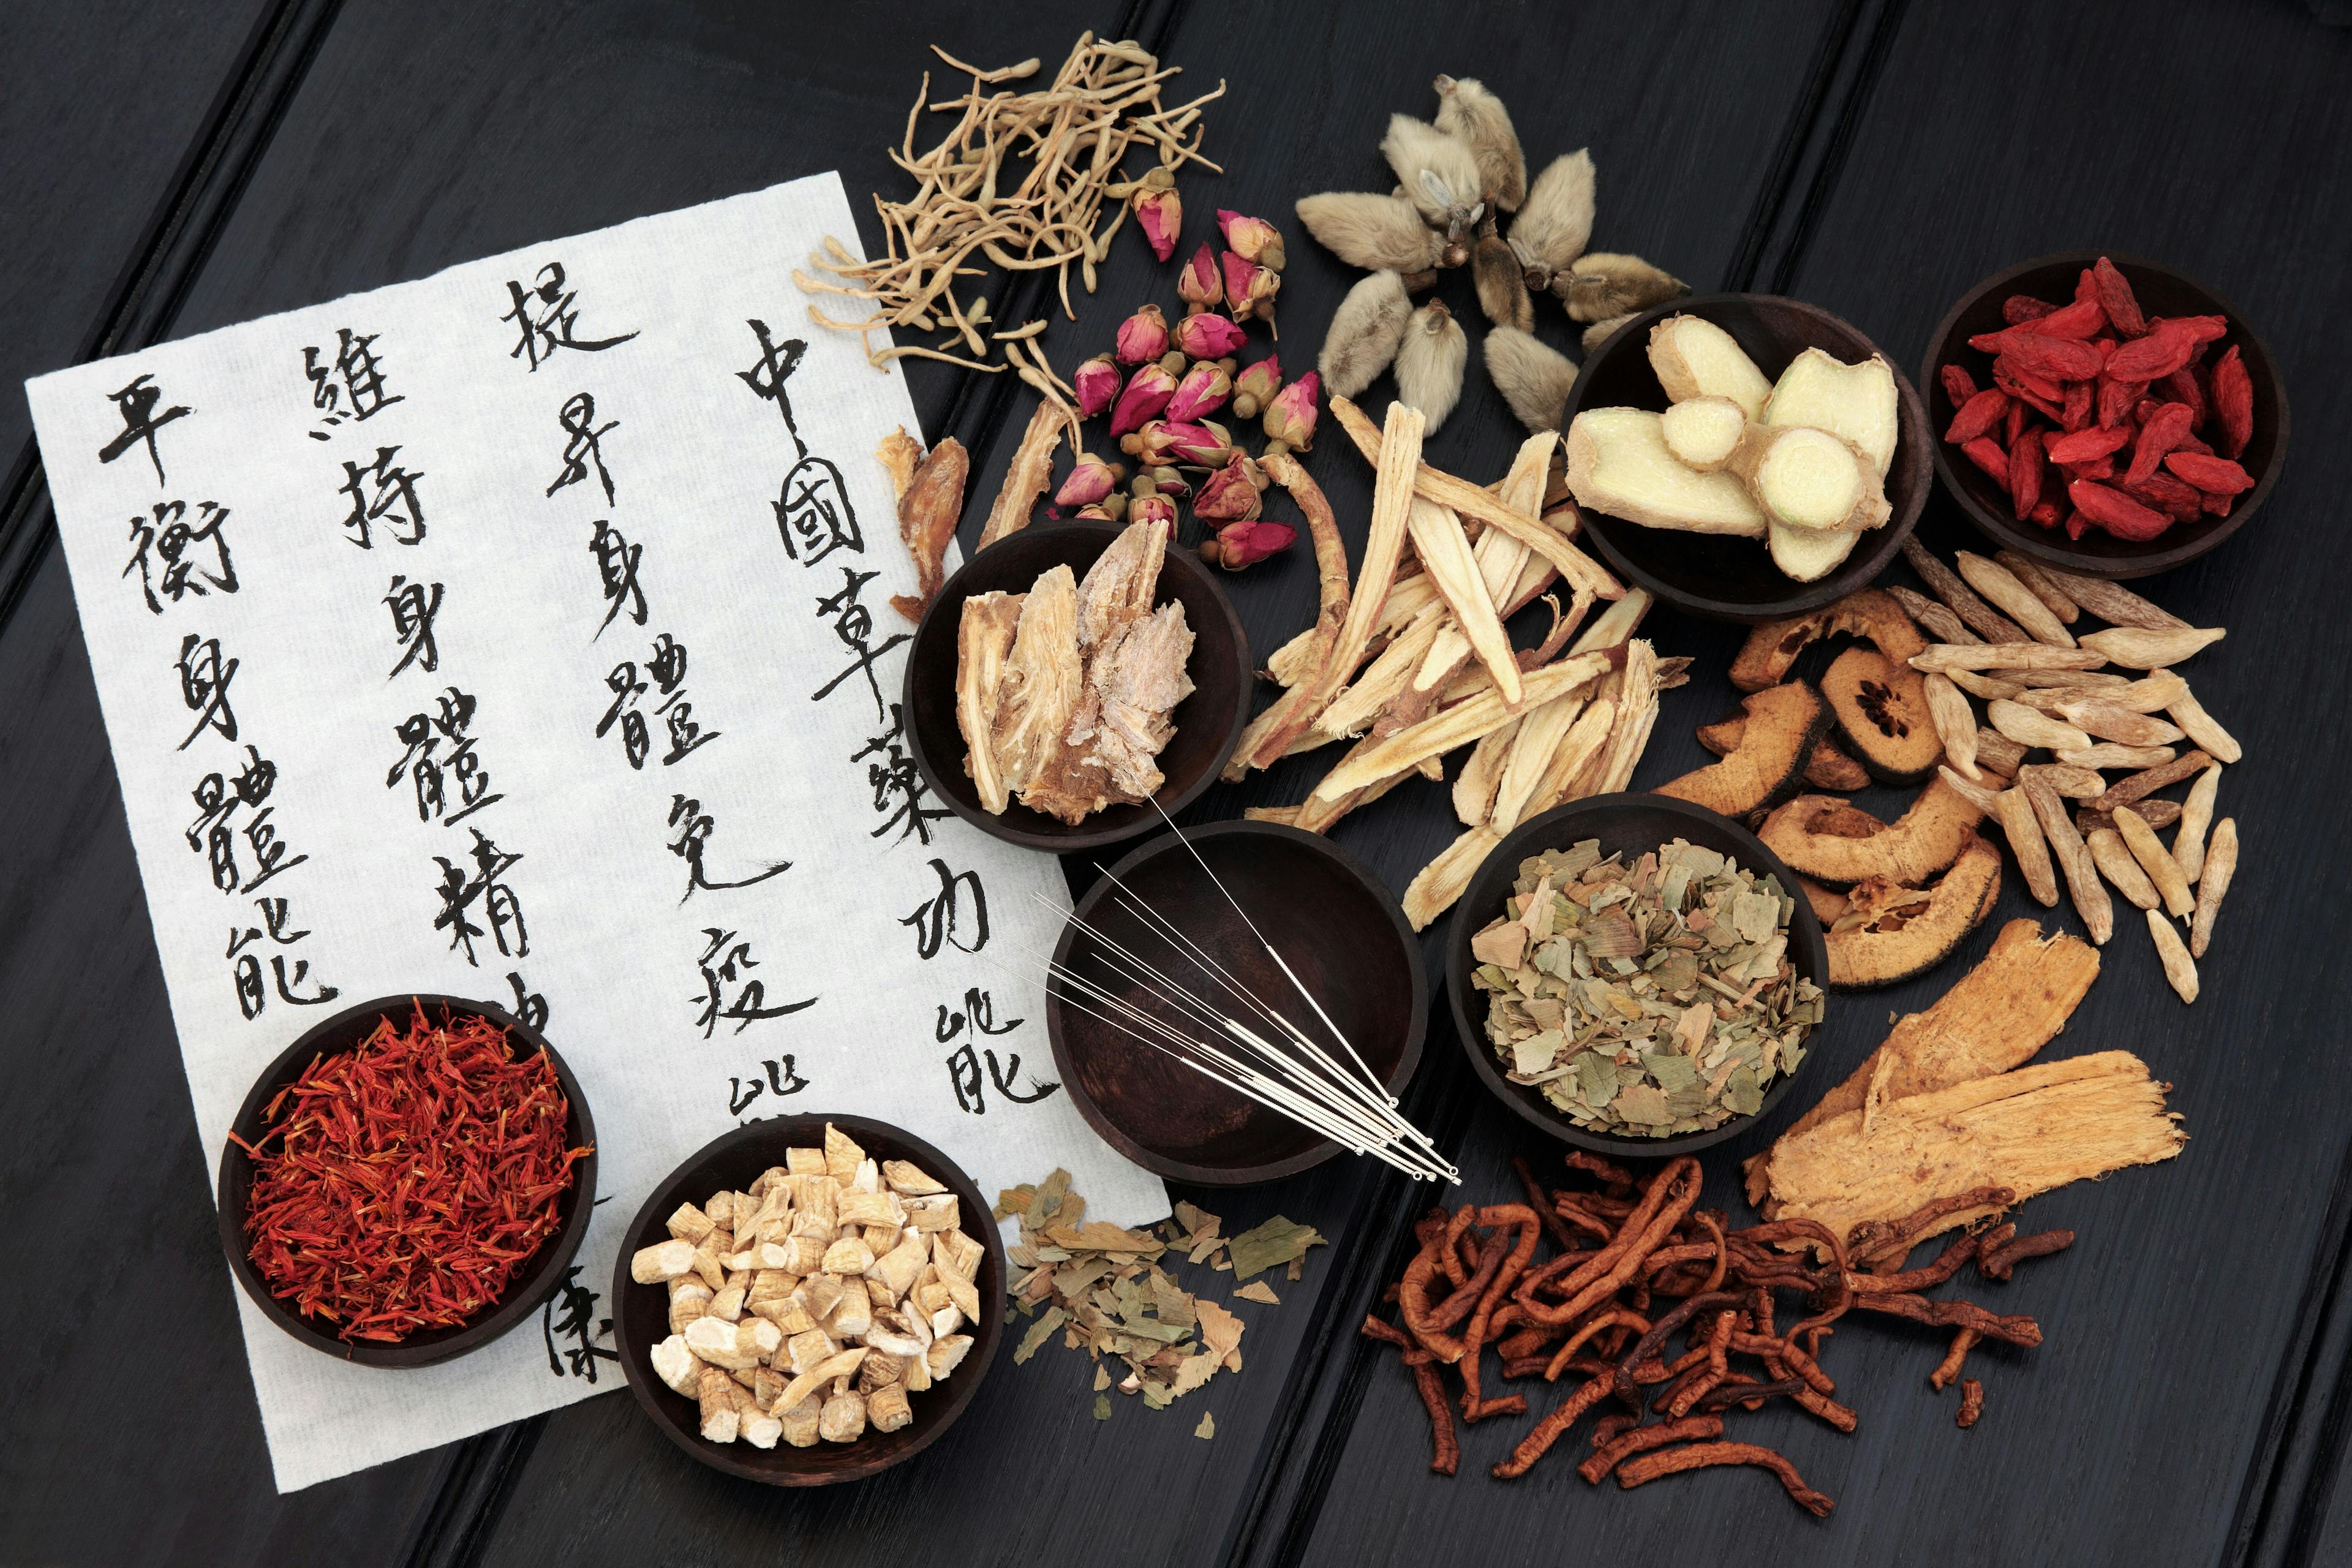 Traditional Chinese Medicine | Image Credit: © marilyn barbone - stock.adobe.com